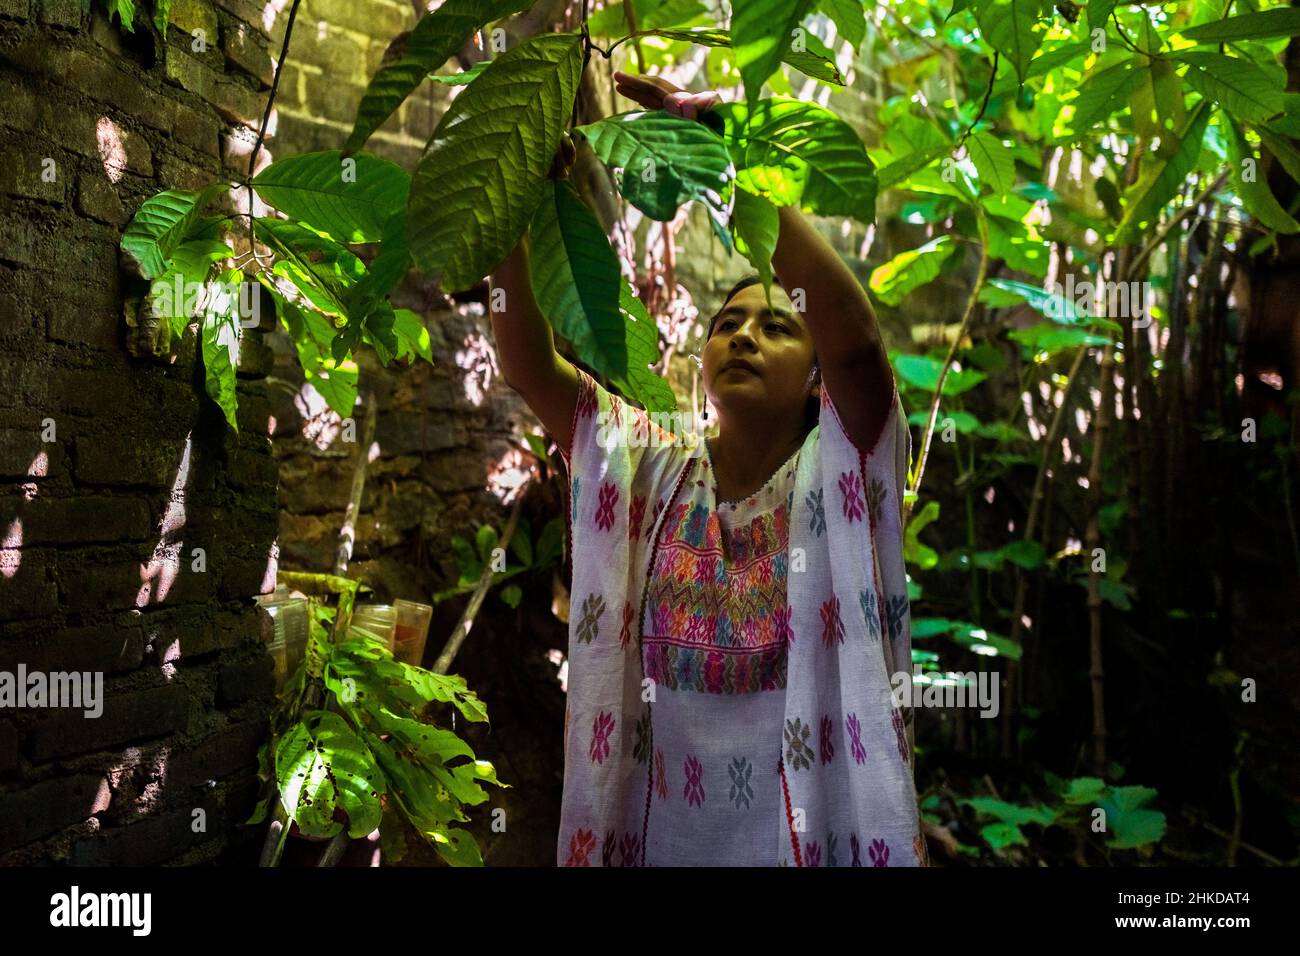 An indigenous woman plucks leaves from a cacao tree for wrapping chocolate balls in artisanal chocolate manufacture in Xochistlahuaca, Mexico. Stock Photo